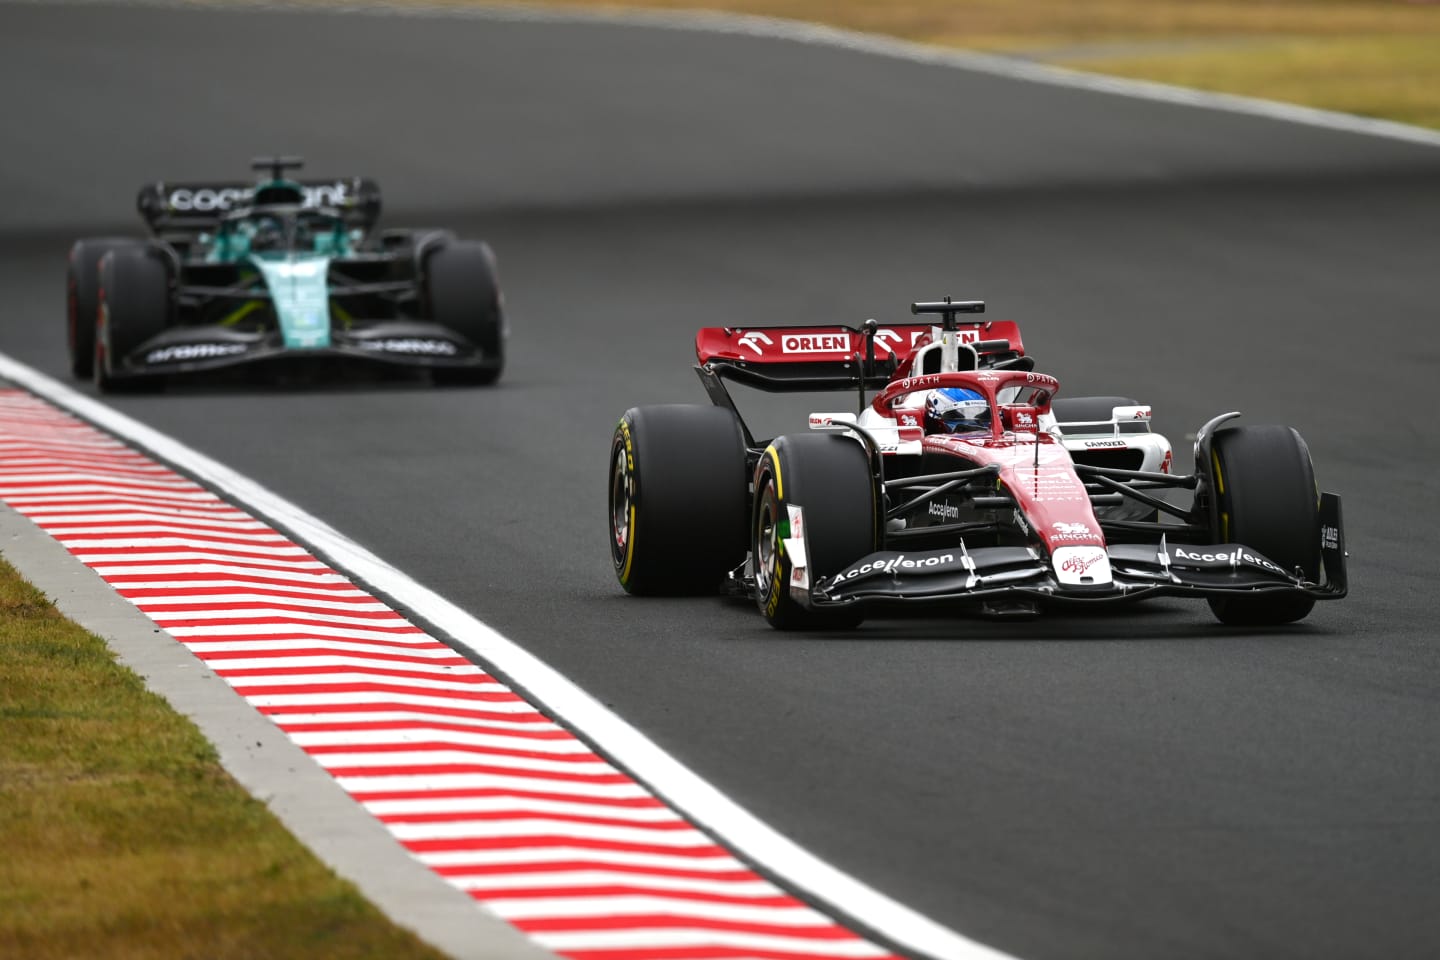 BUDAPEST, HUNGARY - JULY 31: Valtteri Bottas of Finland driving the (77) Alfa Romeo F1 C42 Ferrari leads Lance Stroll of Canada driving the (18) Aston Martin AMR22 Mercedes during the F1 Grand Prix of Hungary at Hungaroring on July 31, 2022 in Budapest, Hungary. (Photo by Dan Mullan/Getty Images)